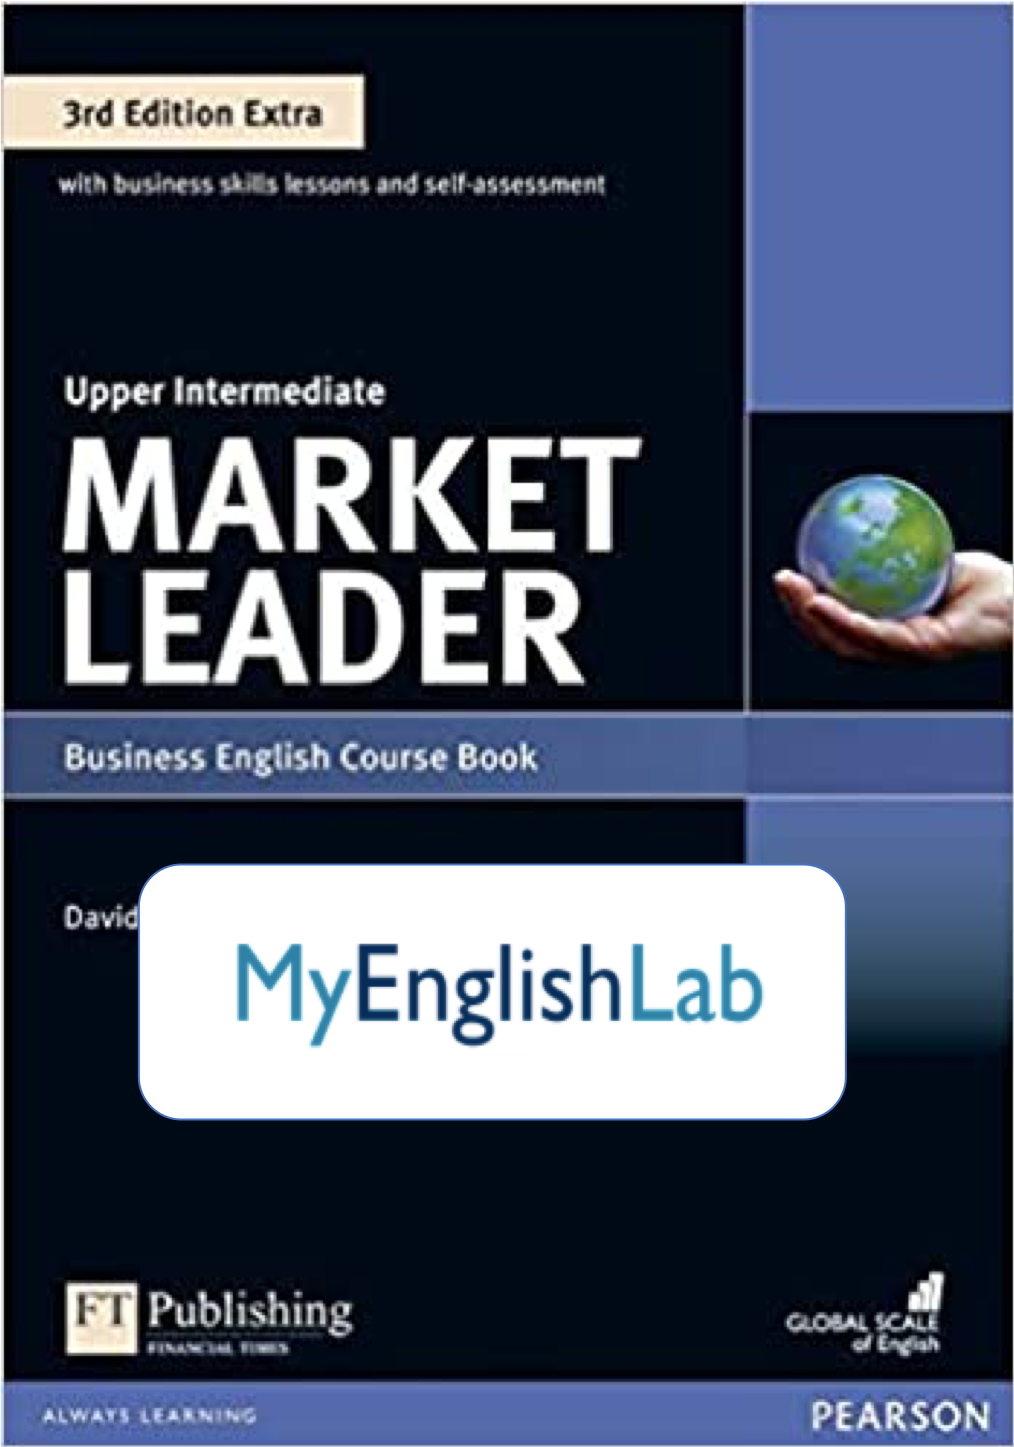 BOOK　WITH　–　DVD-ROM　EXTRA　ELT　3RD　MARKET　EDITION　INTERMEDIATE　MYENGLISHLAB　LEADER　Solutions　UPPER　COURSE